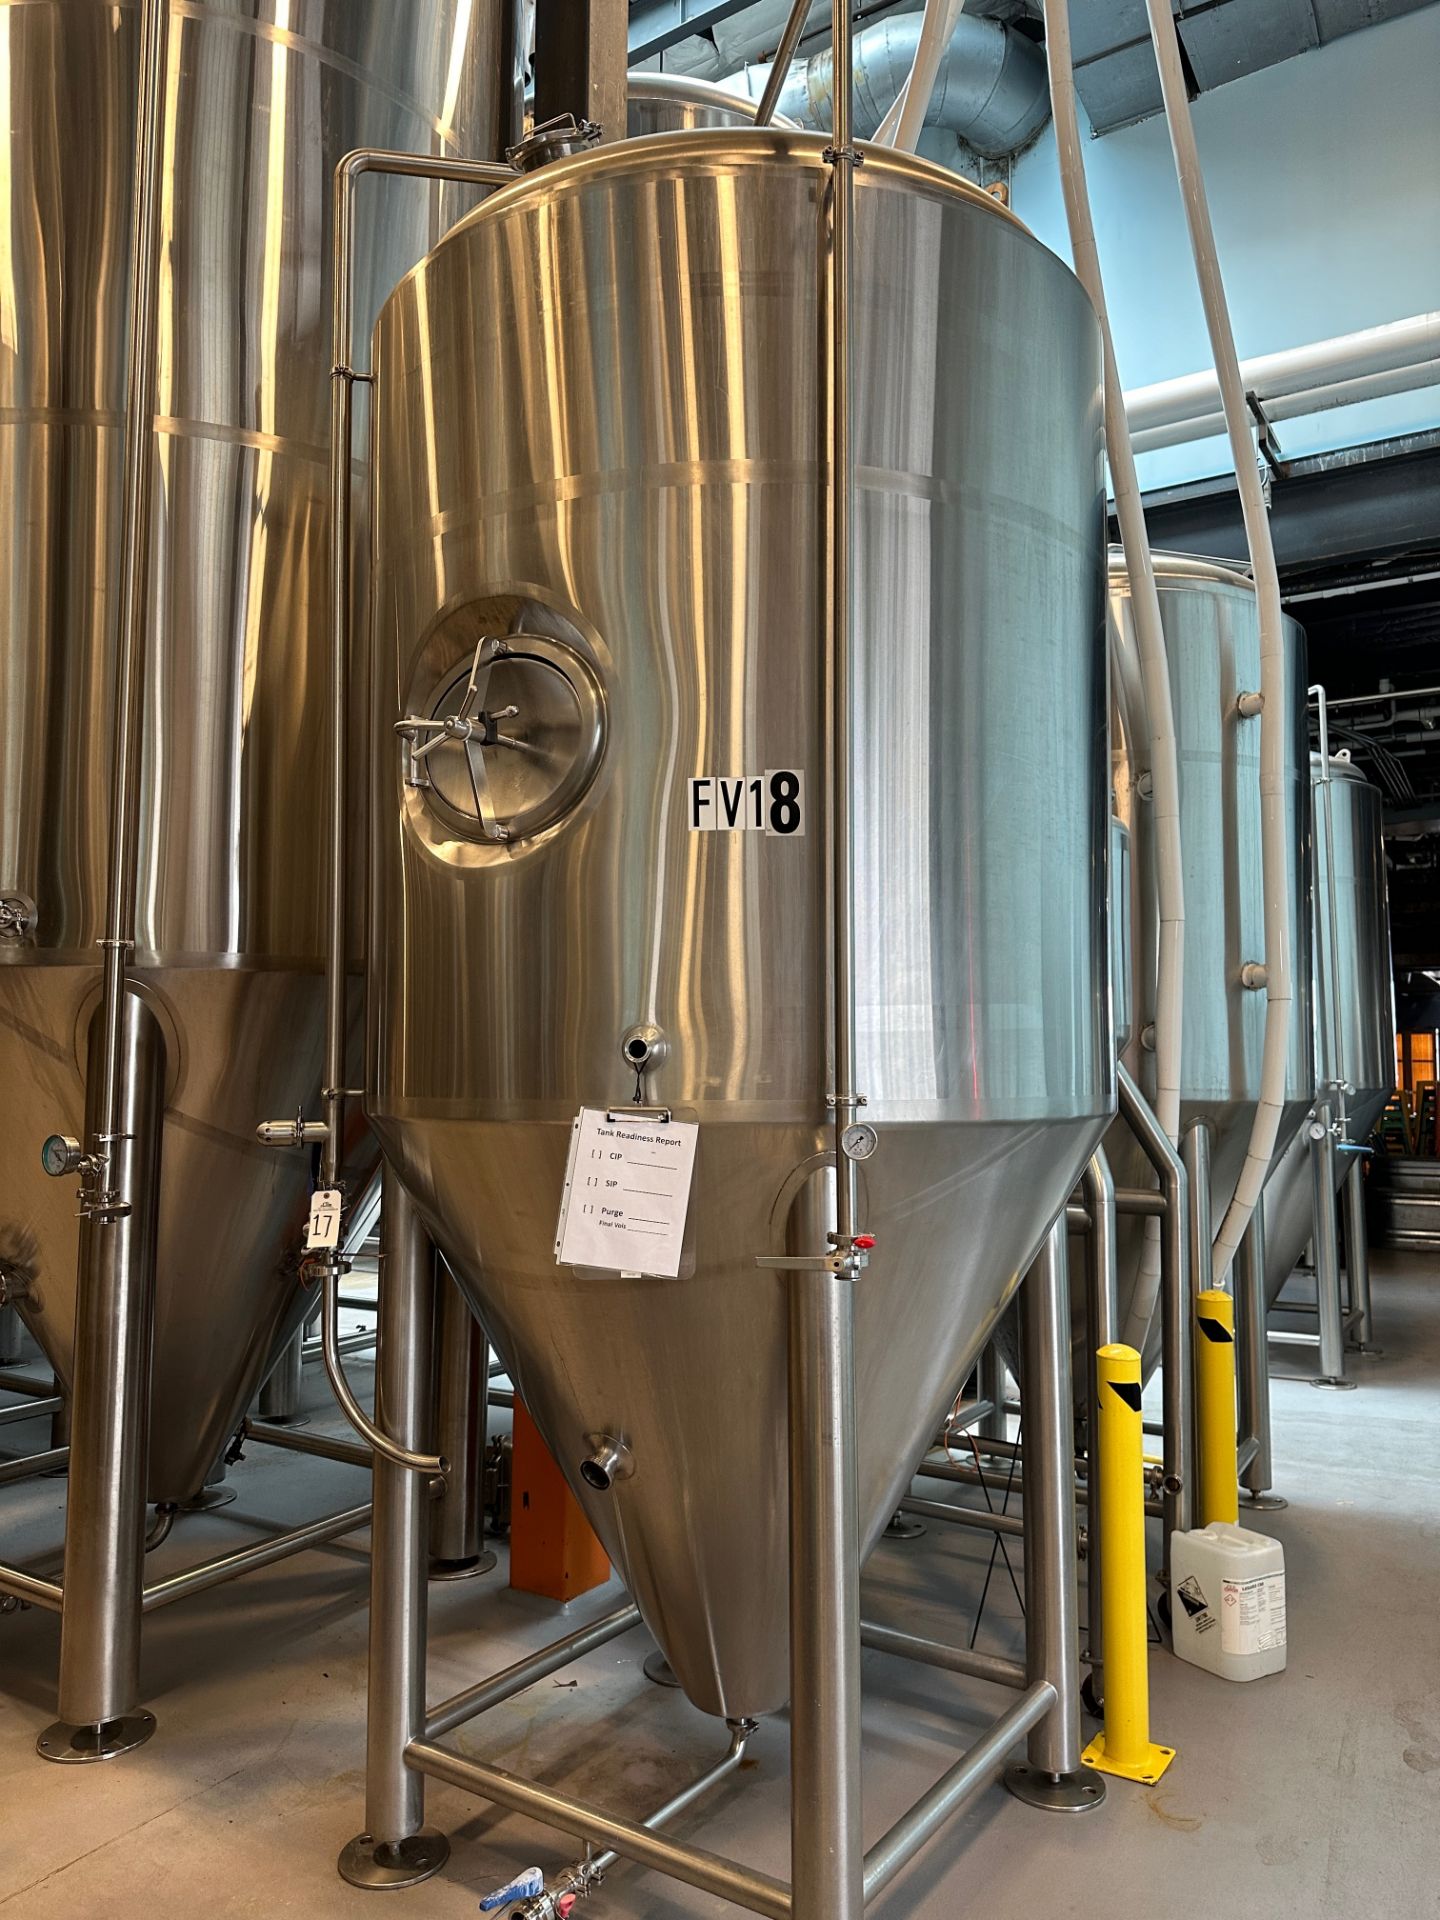 Complete 40 BBL Microbrewery - 40 BBL Deutsche 4-Vessel Brewhouse, Tanks, Can Line - See Description - Image 41 of 335